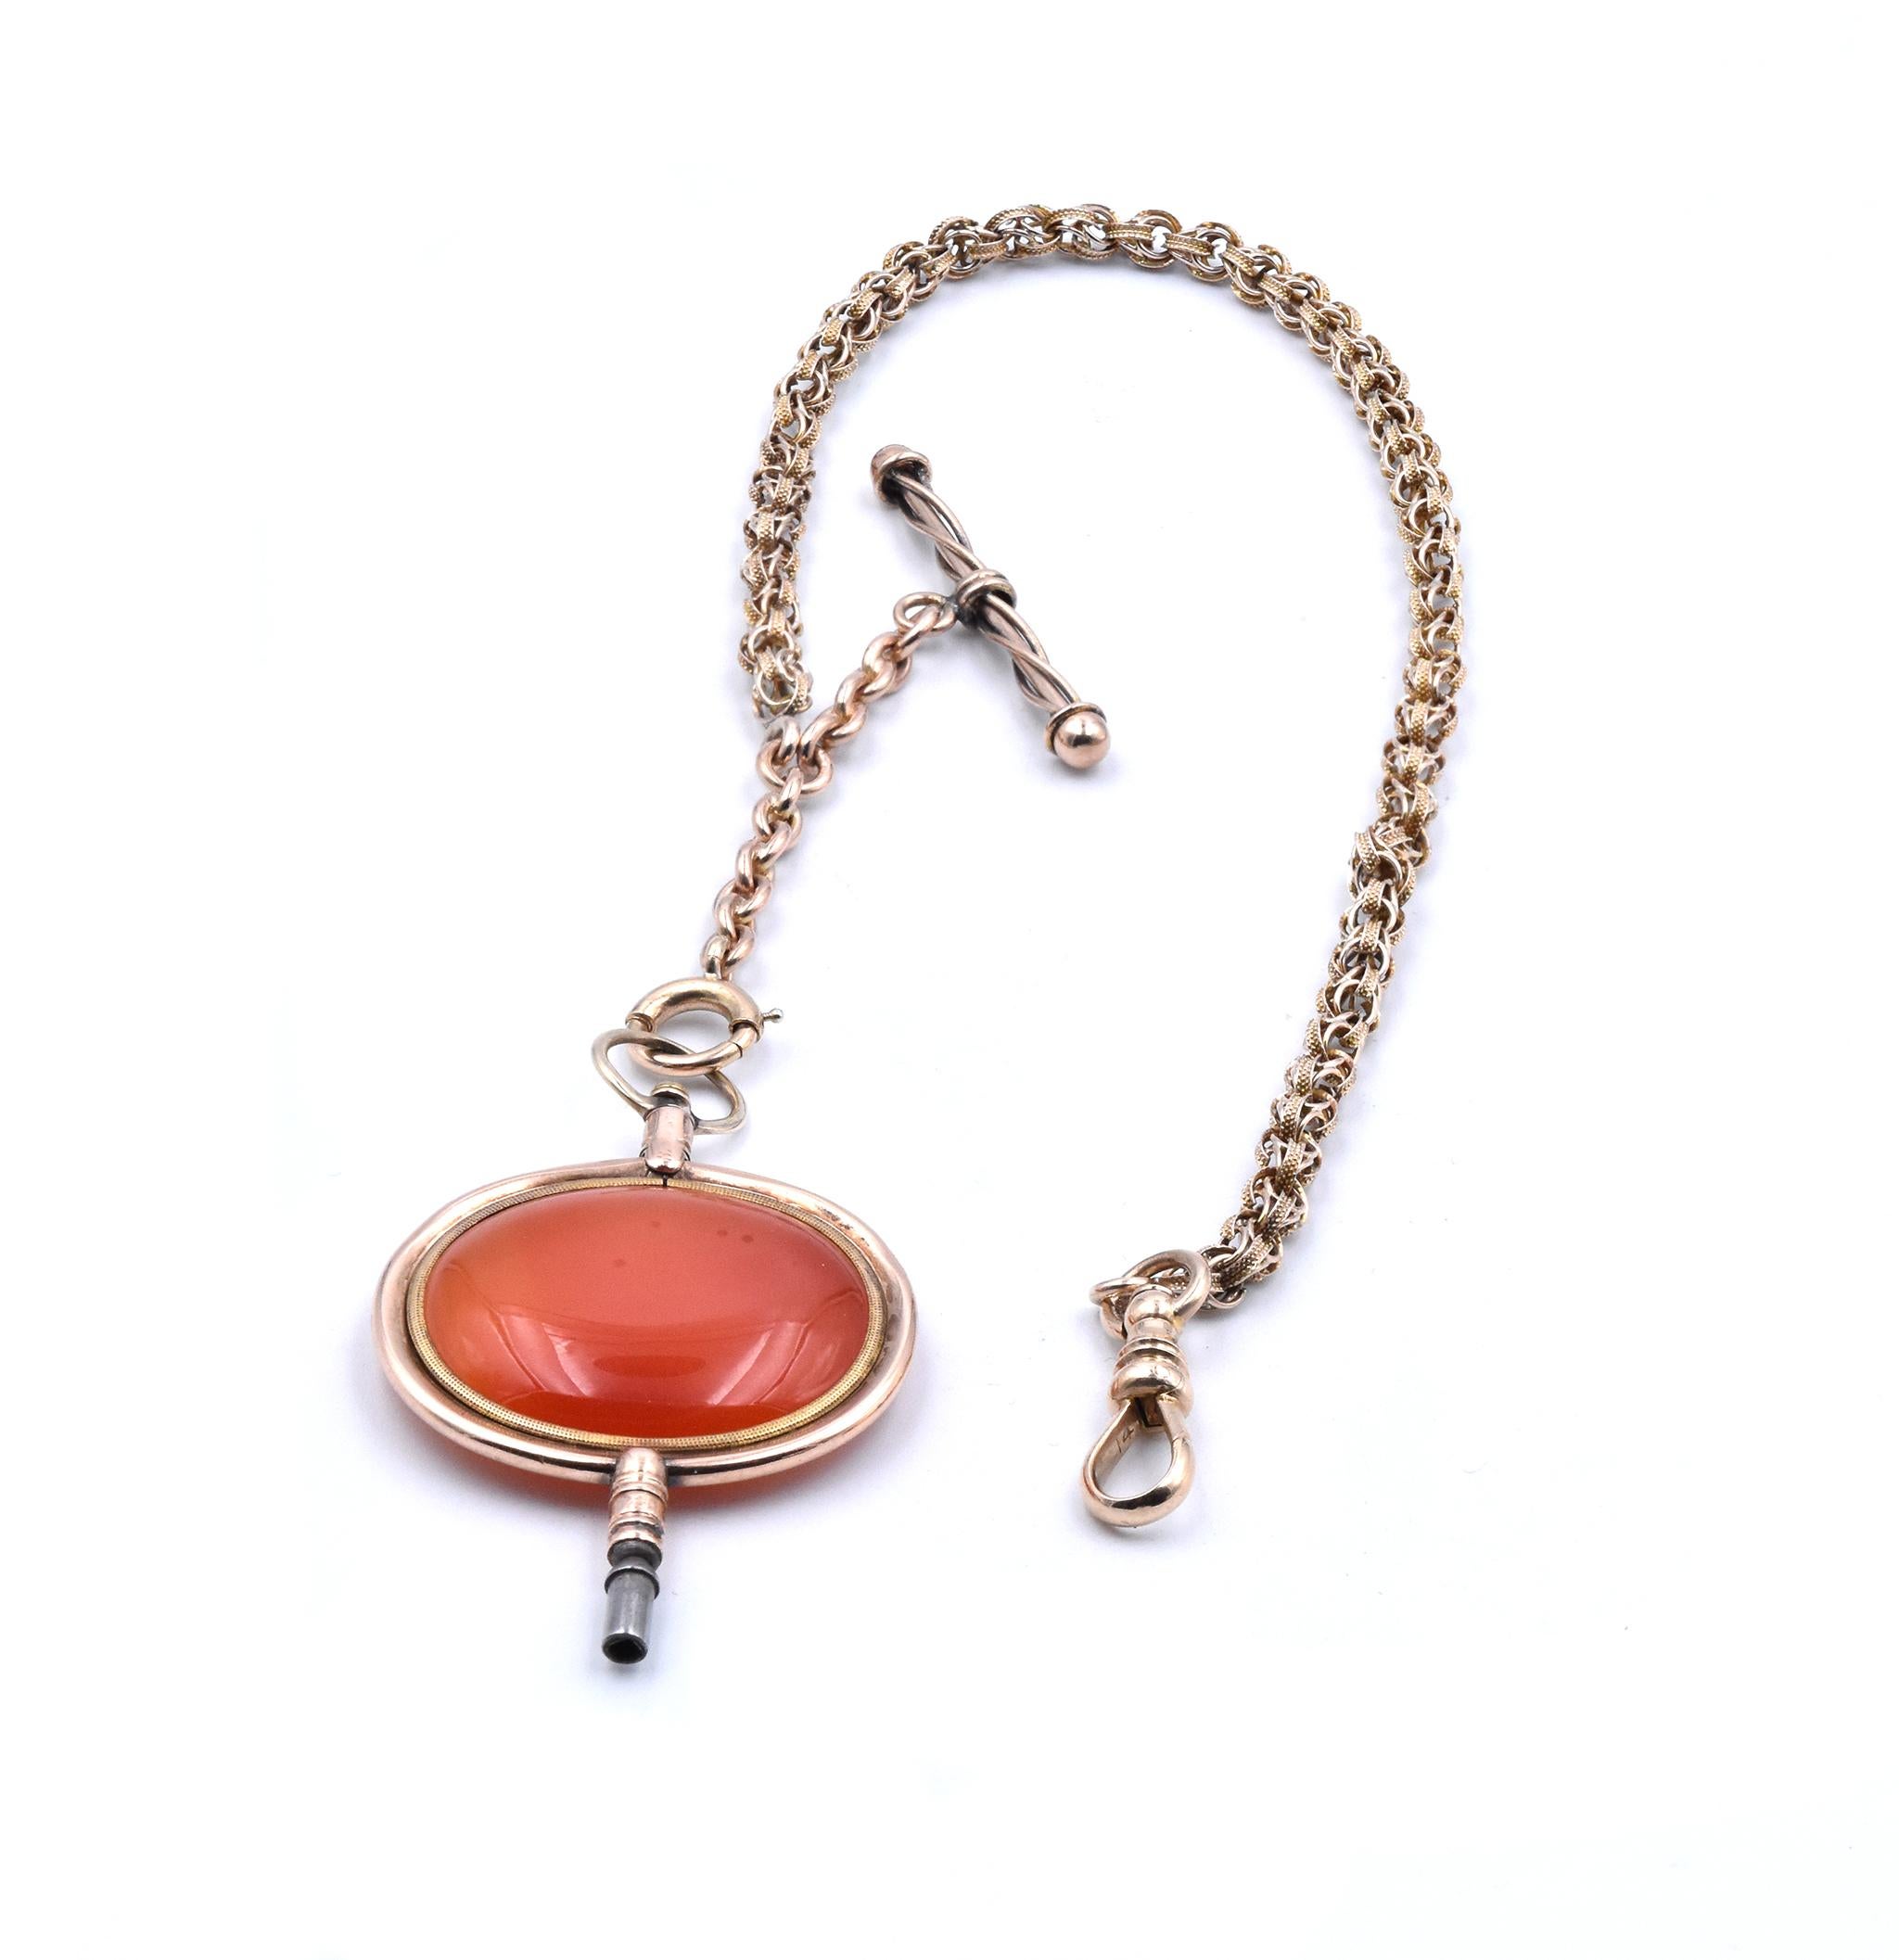 Vintage 14 Karat Yellow Gold Carnelian Fob on 10 Karat Yellow Gold Chain In Excellent Condition For Sale In Scottsdale, AZ